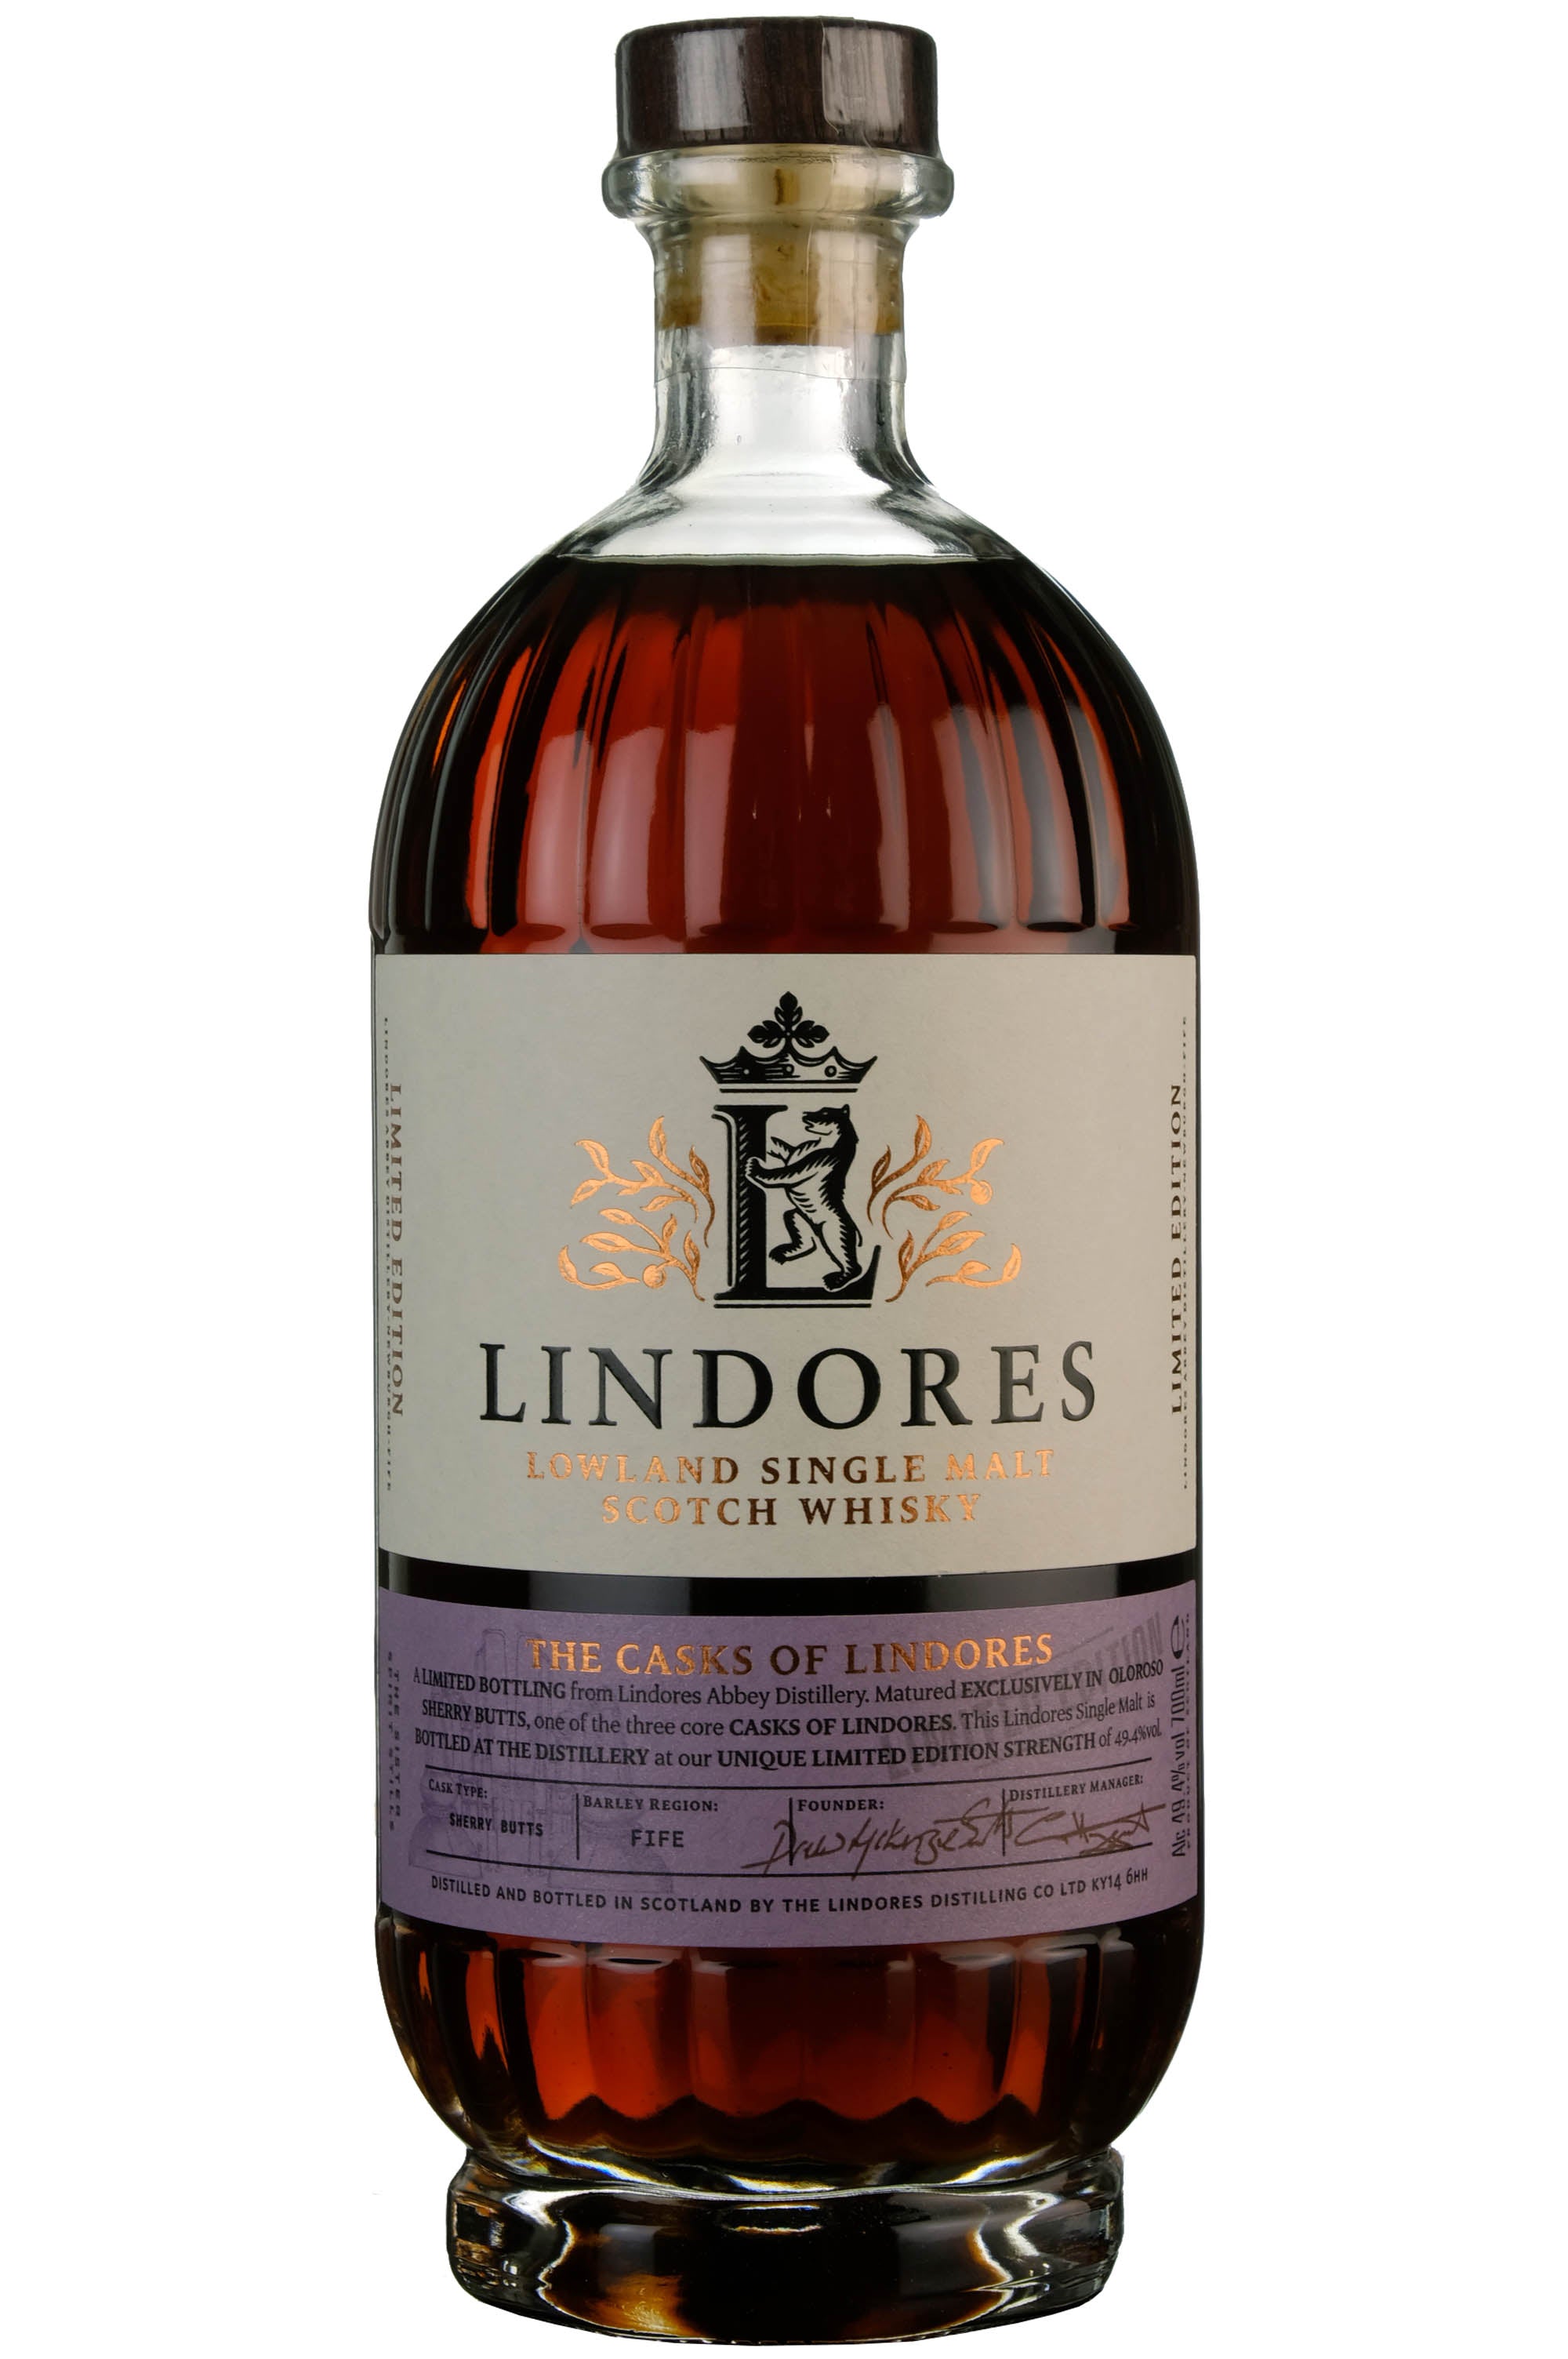 Lindores Abbey Oloroso Sherry Butts